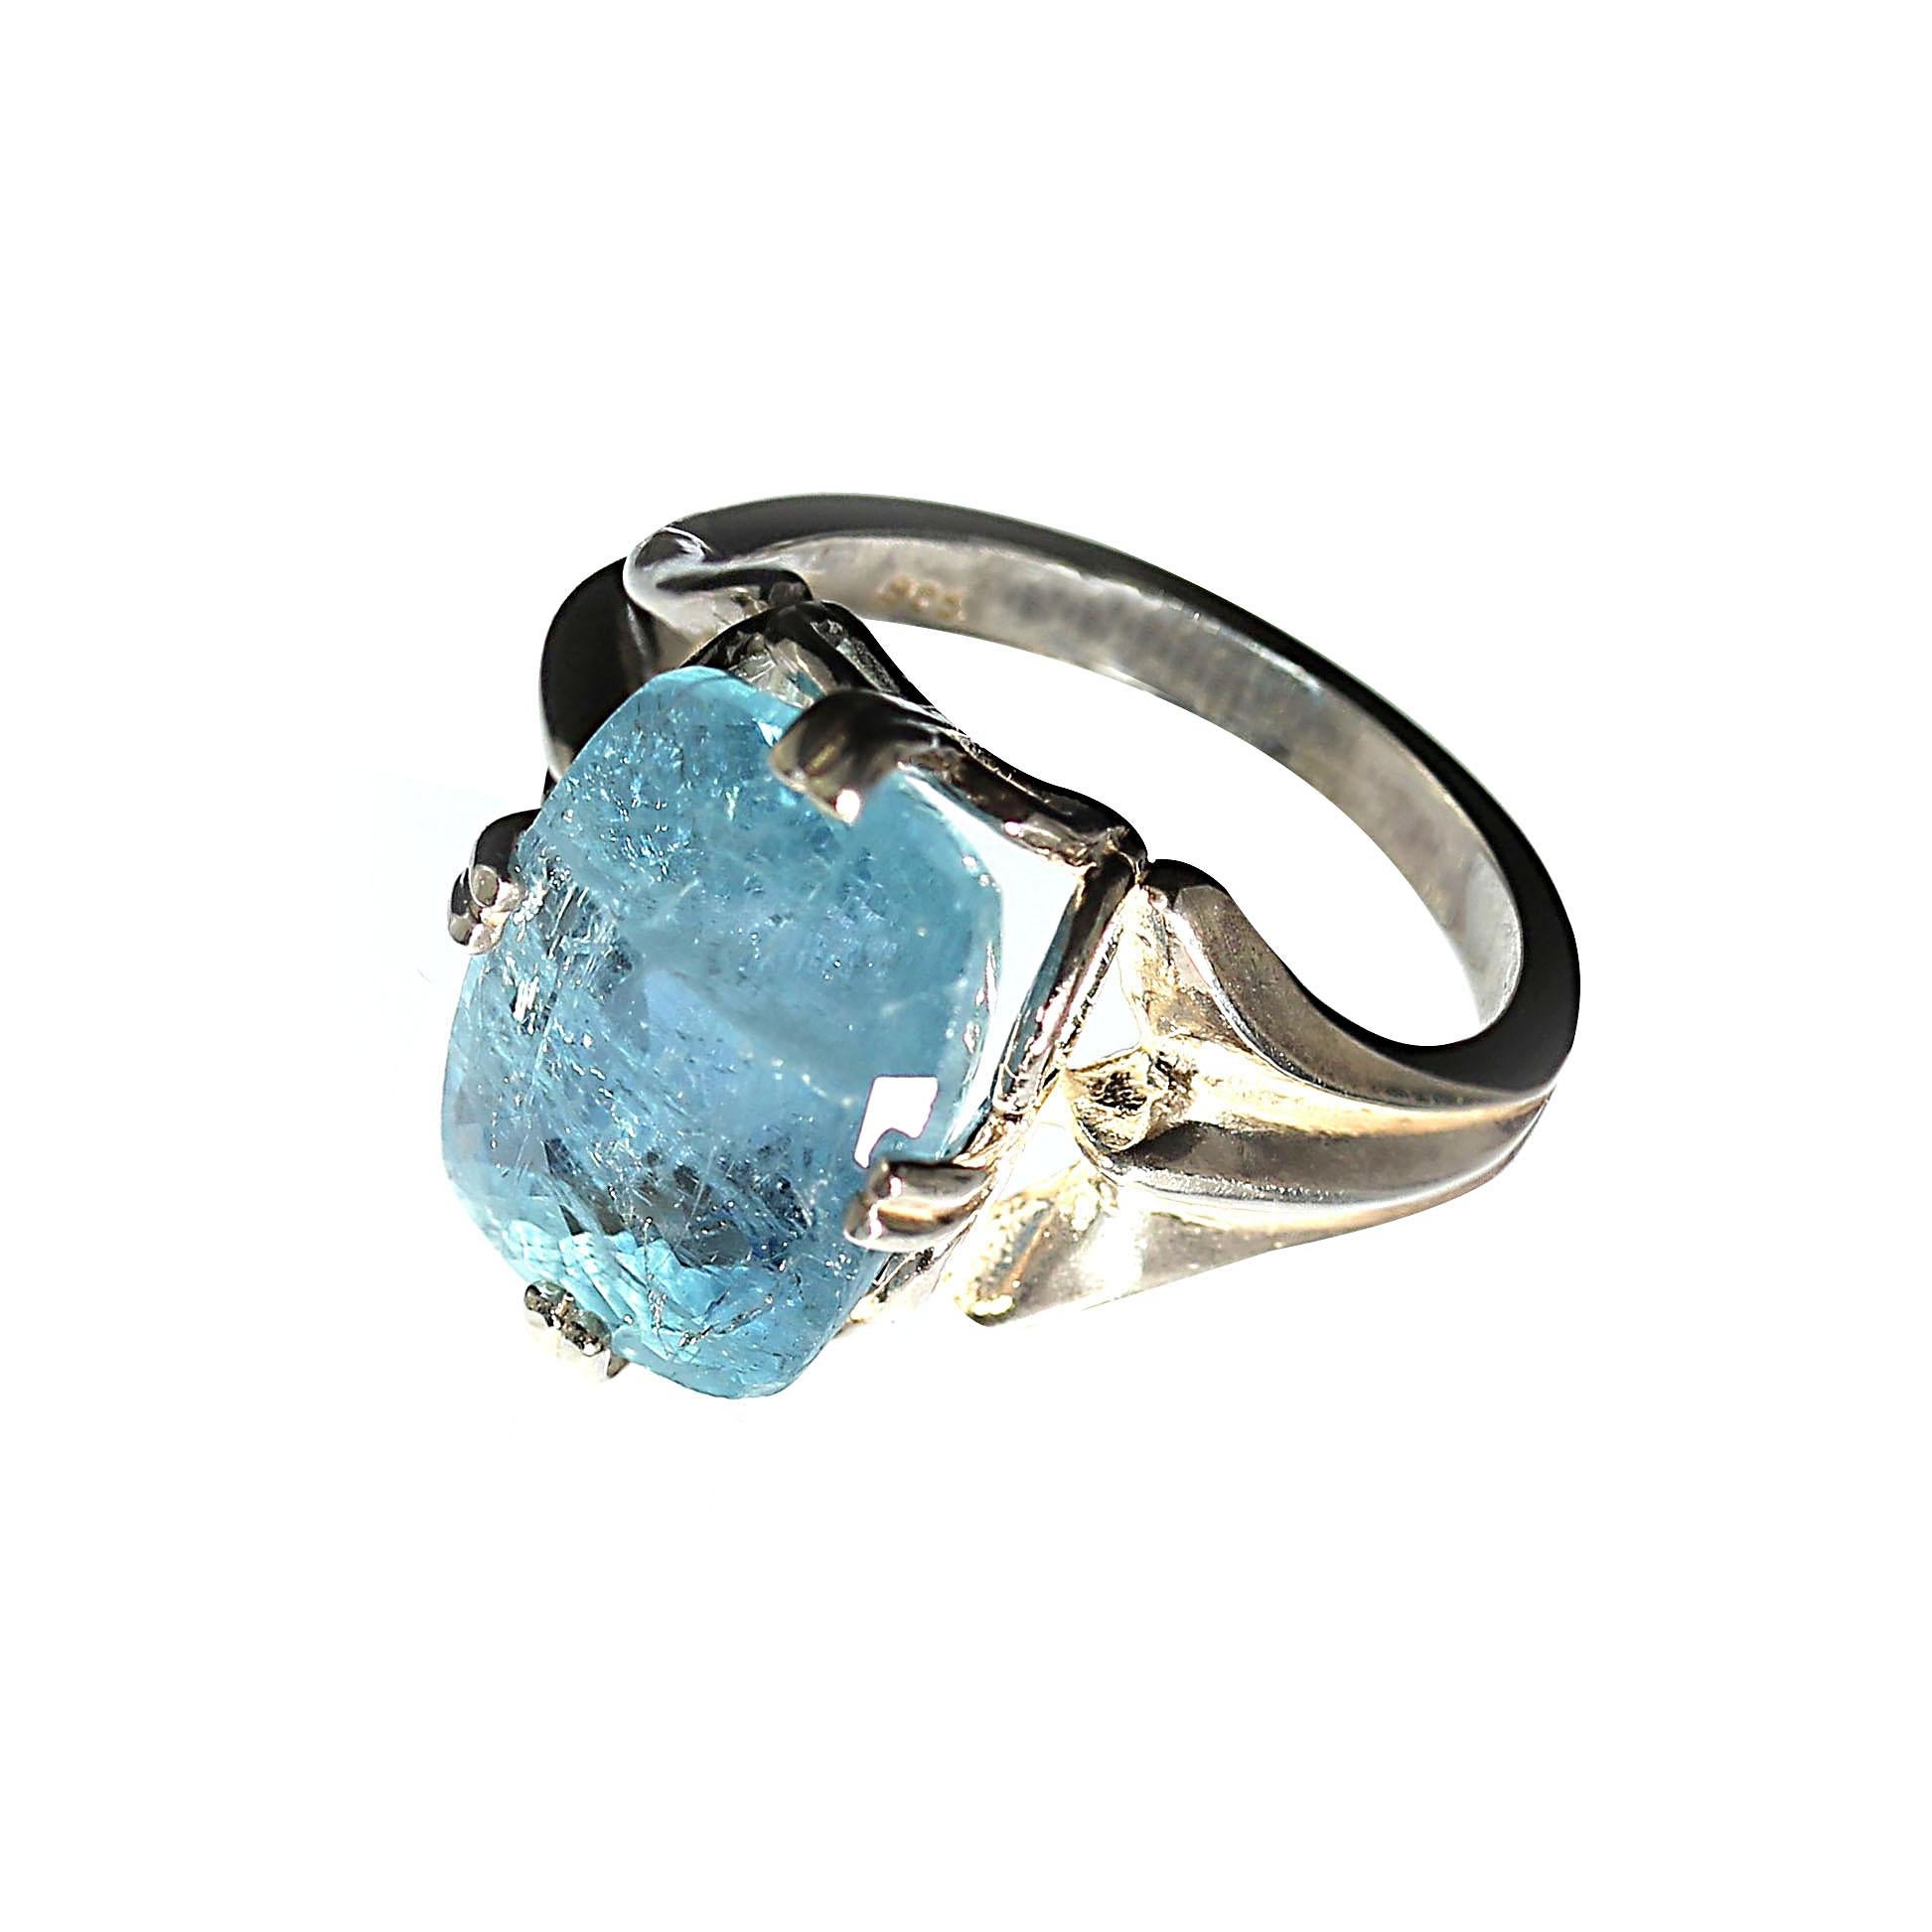 Custom made, Blue Aquamarine in a lovely Cushion set in Sterling Silver ring with detail and elegance. The four prongs are set on the sides and not the corners of the gemstone.  This unique Aquamarine is a beautiful deep real Aquamarine blue and